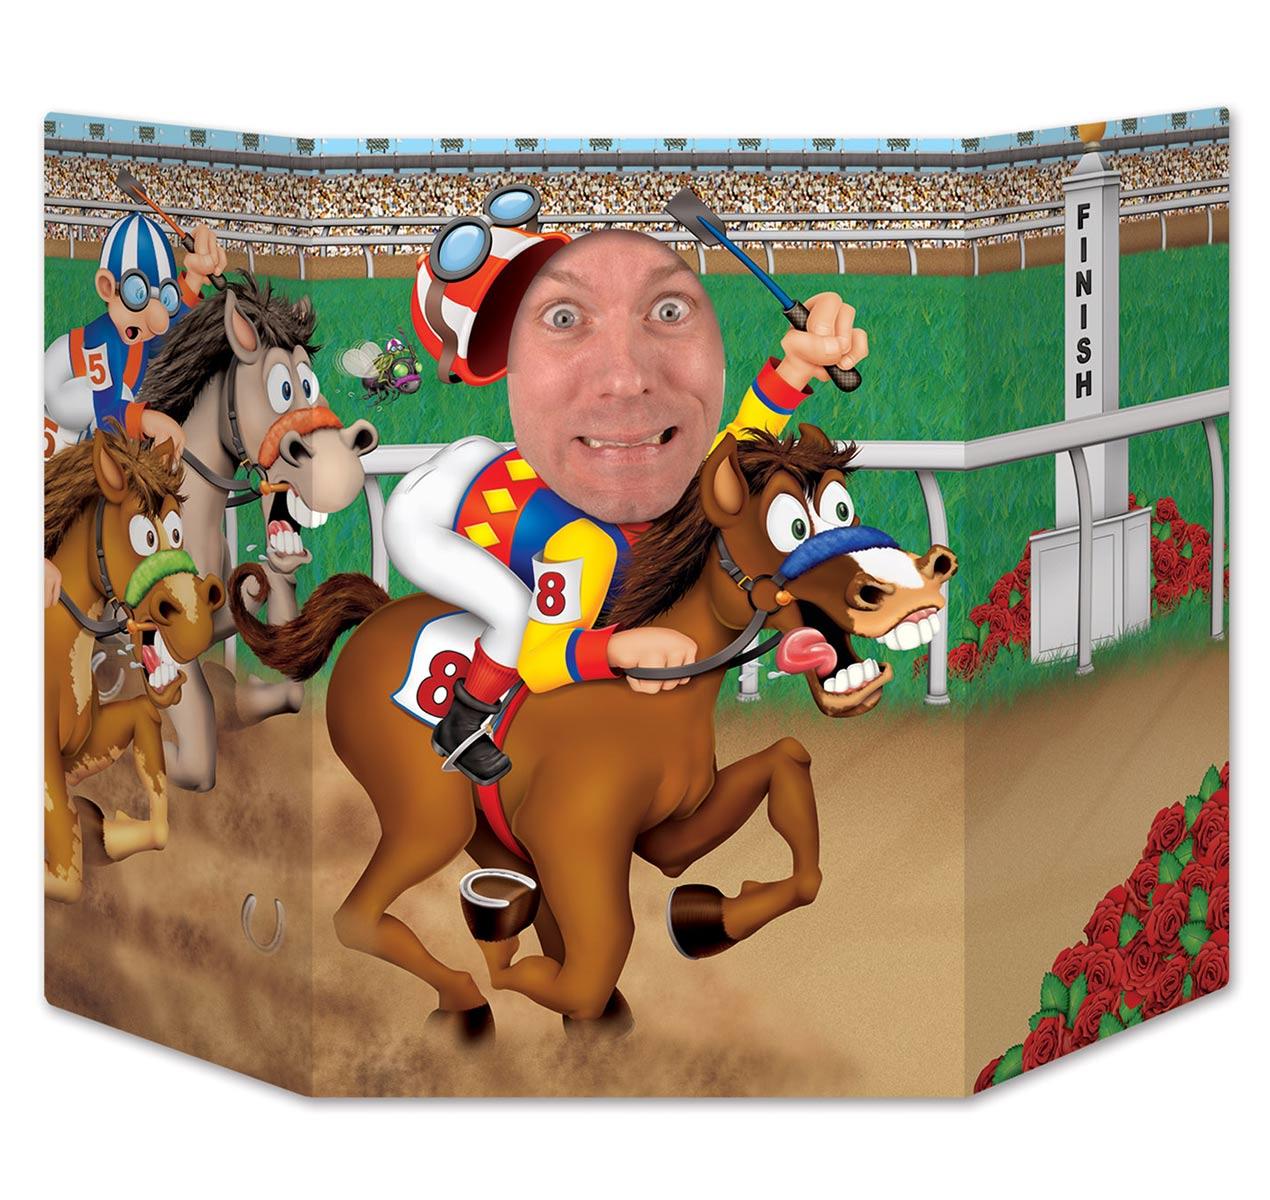 Horse Racing Photo Prop - 37" x  25" by Beistle 57958 available here at Karnival Costumes online party shop